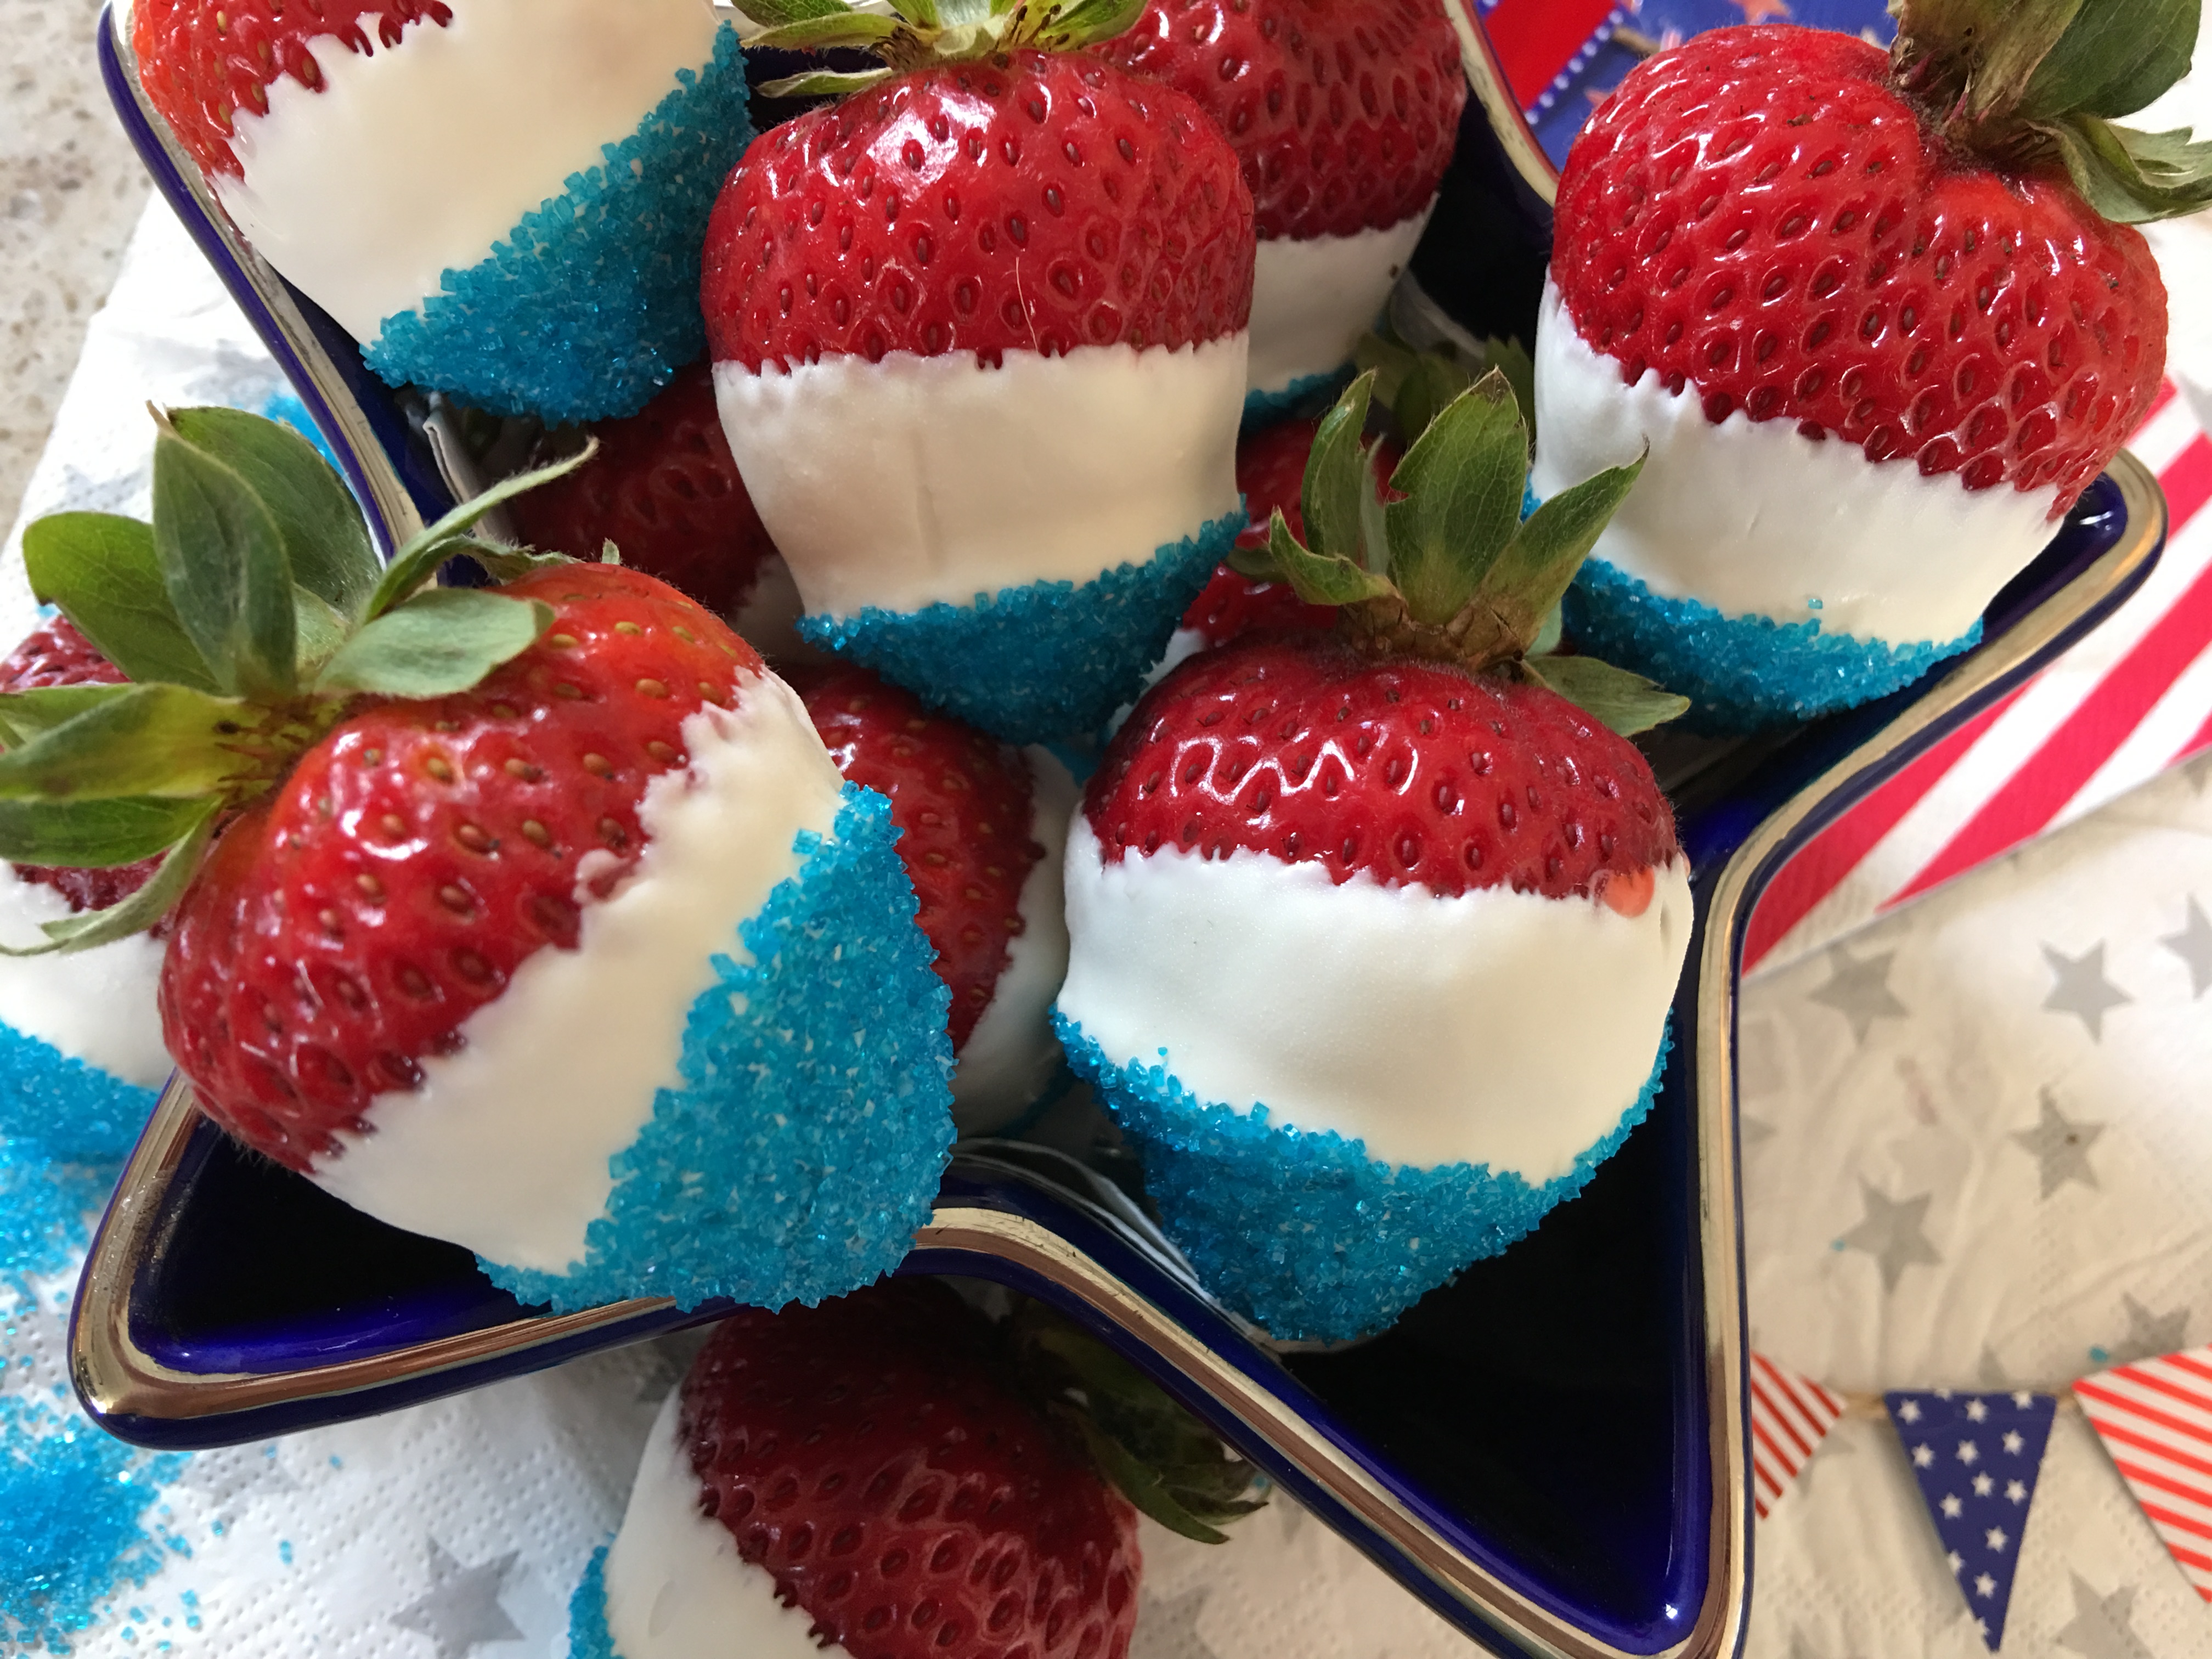 Festive 4th of July Chocolate Covered Strawberries